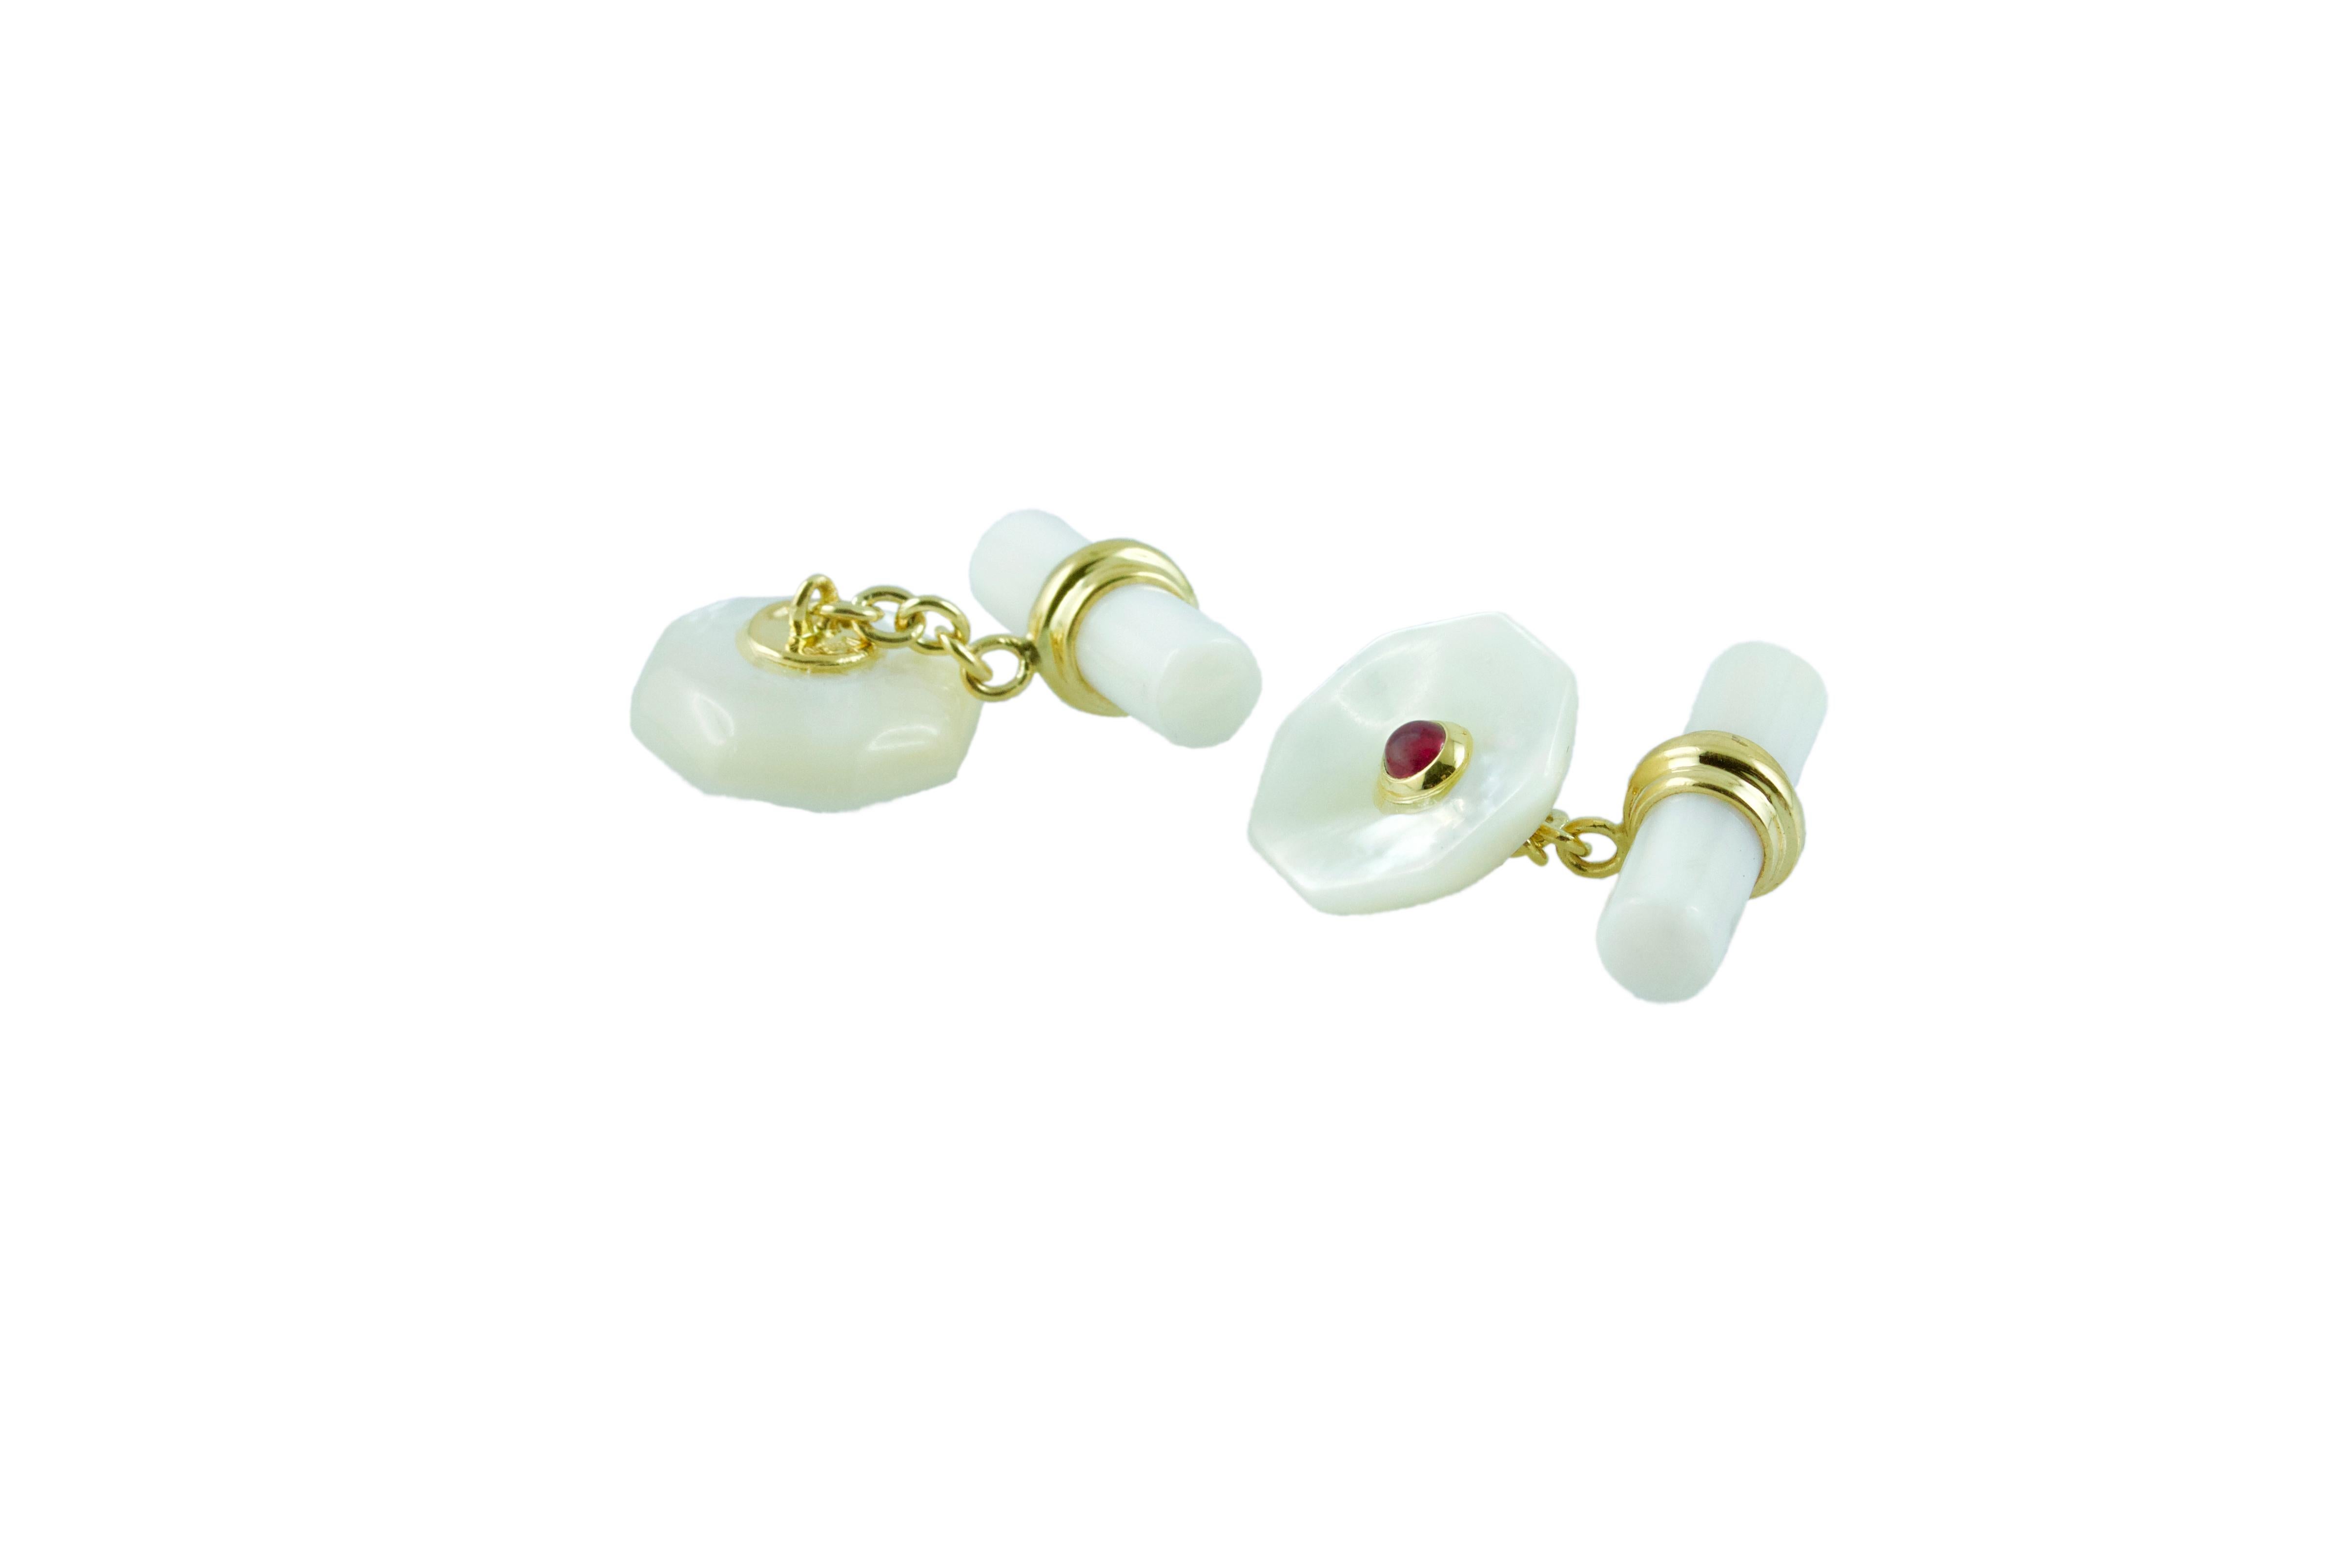 This elegant pair of cufflinks made in Mother of Pearl features a cylindrical toggle and a front face shaped as an octagon with a convex, multifaceted surface and a central ornament made of a cabochon ruby. The post linking front face and toggle and